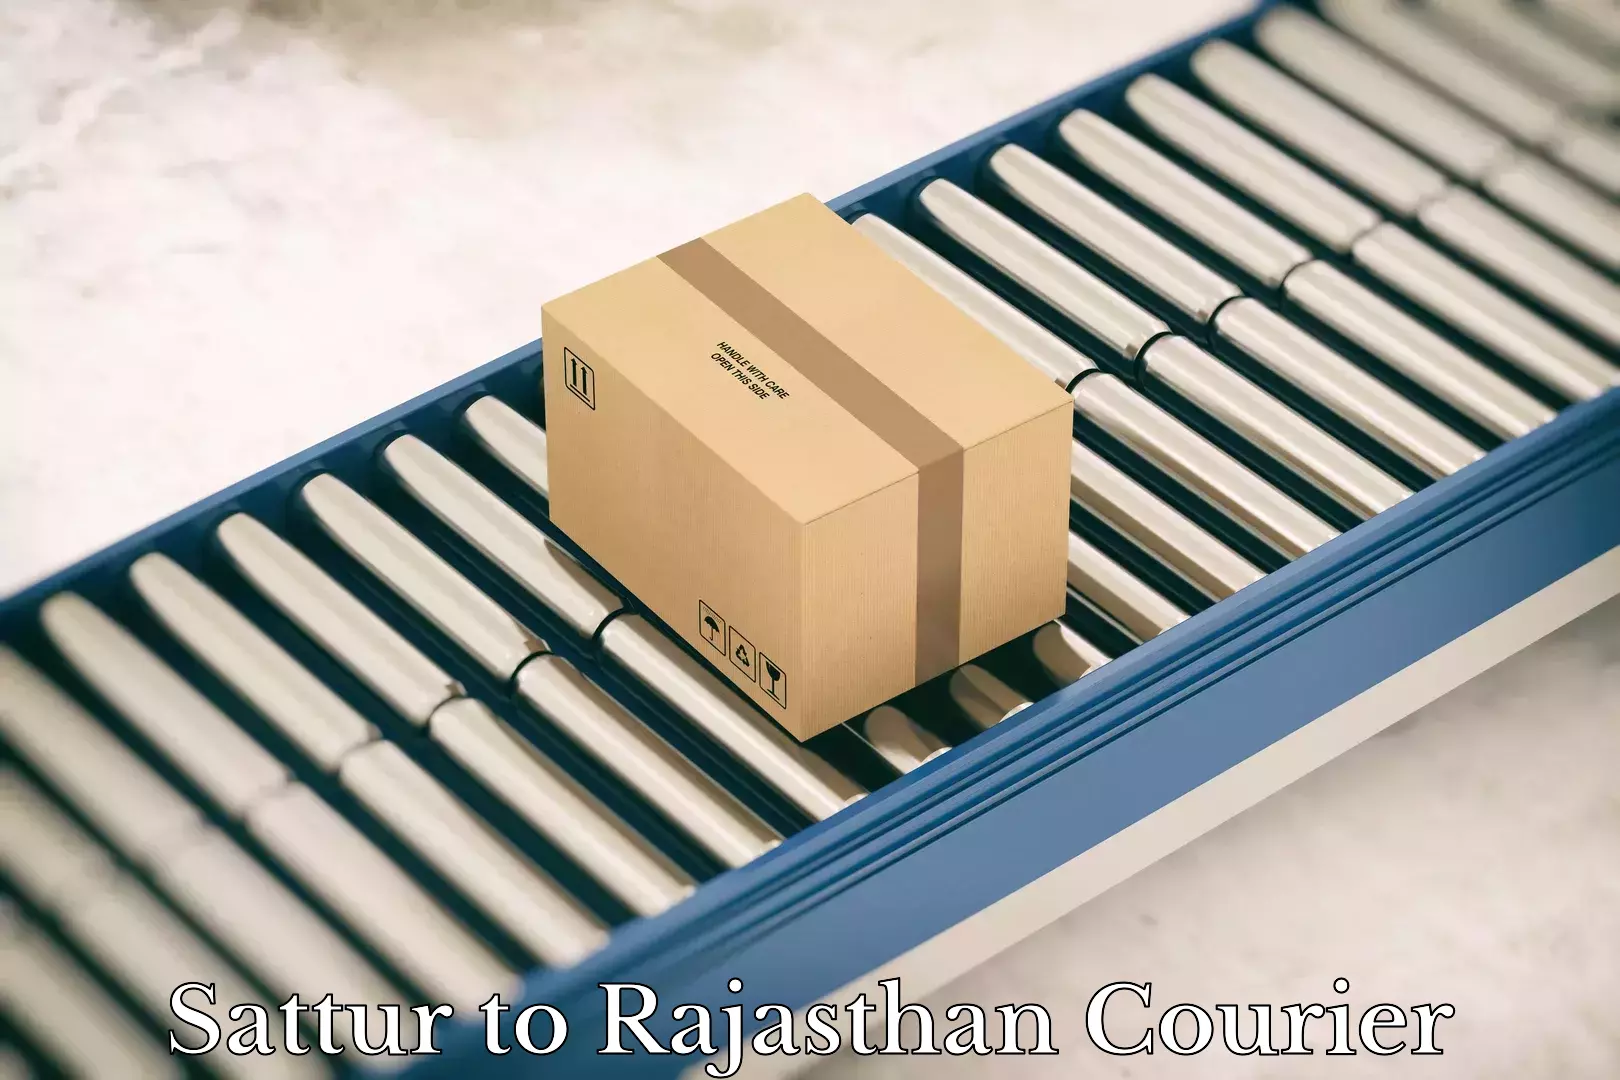 Round-the-clock parcel delivery Sattur to Rajasthan